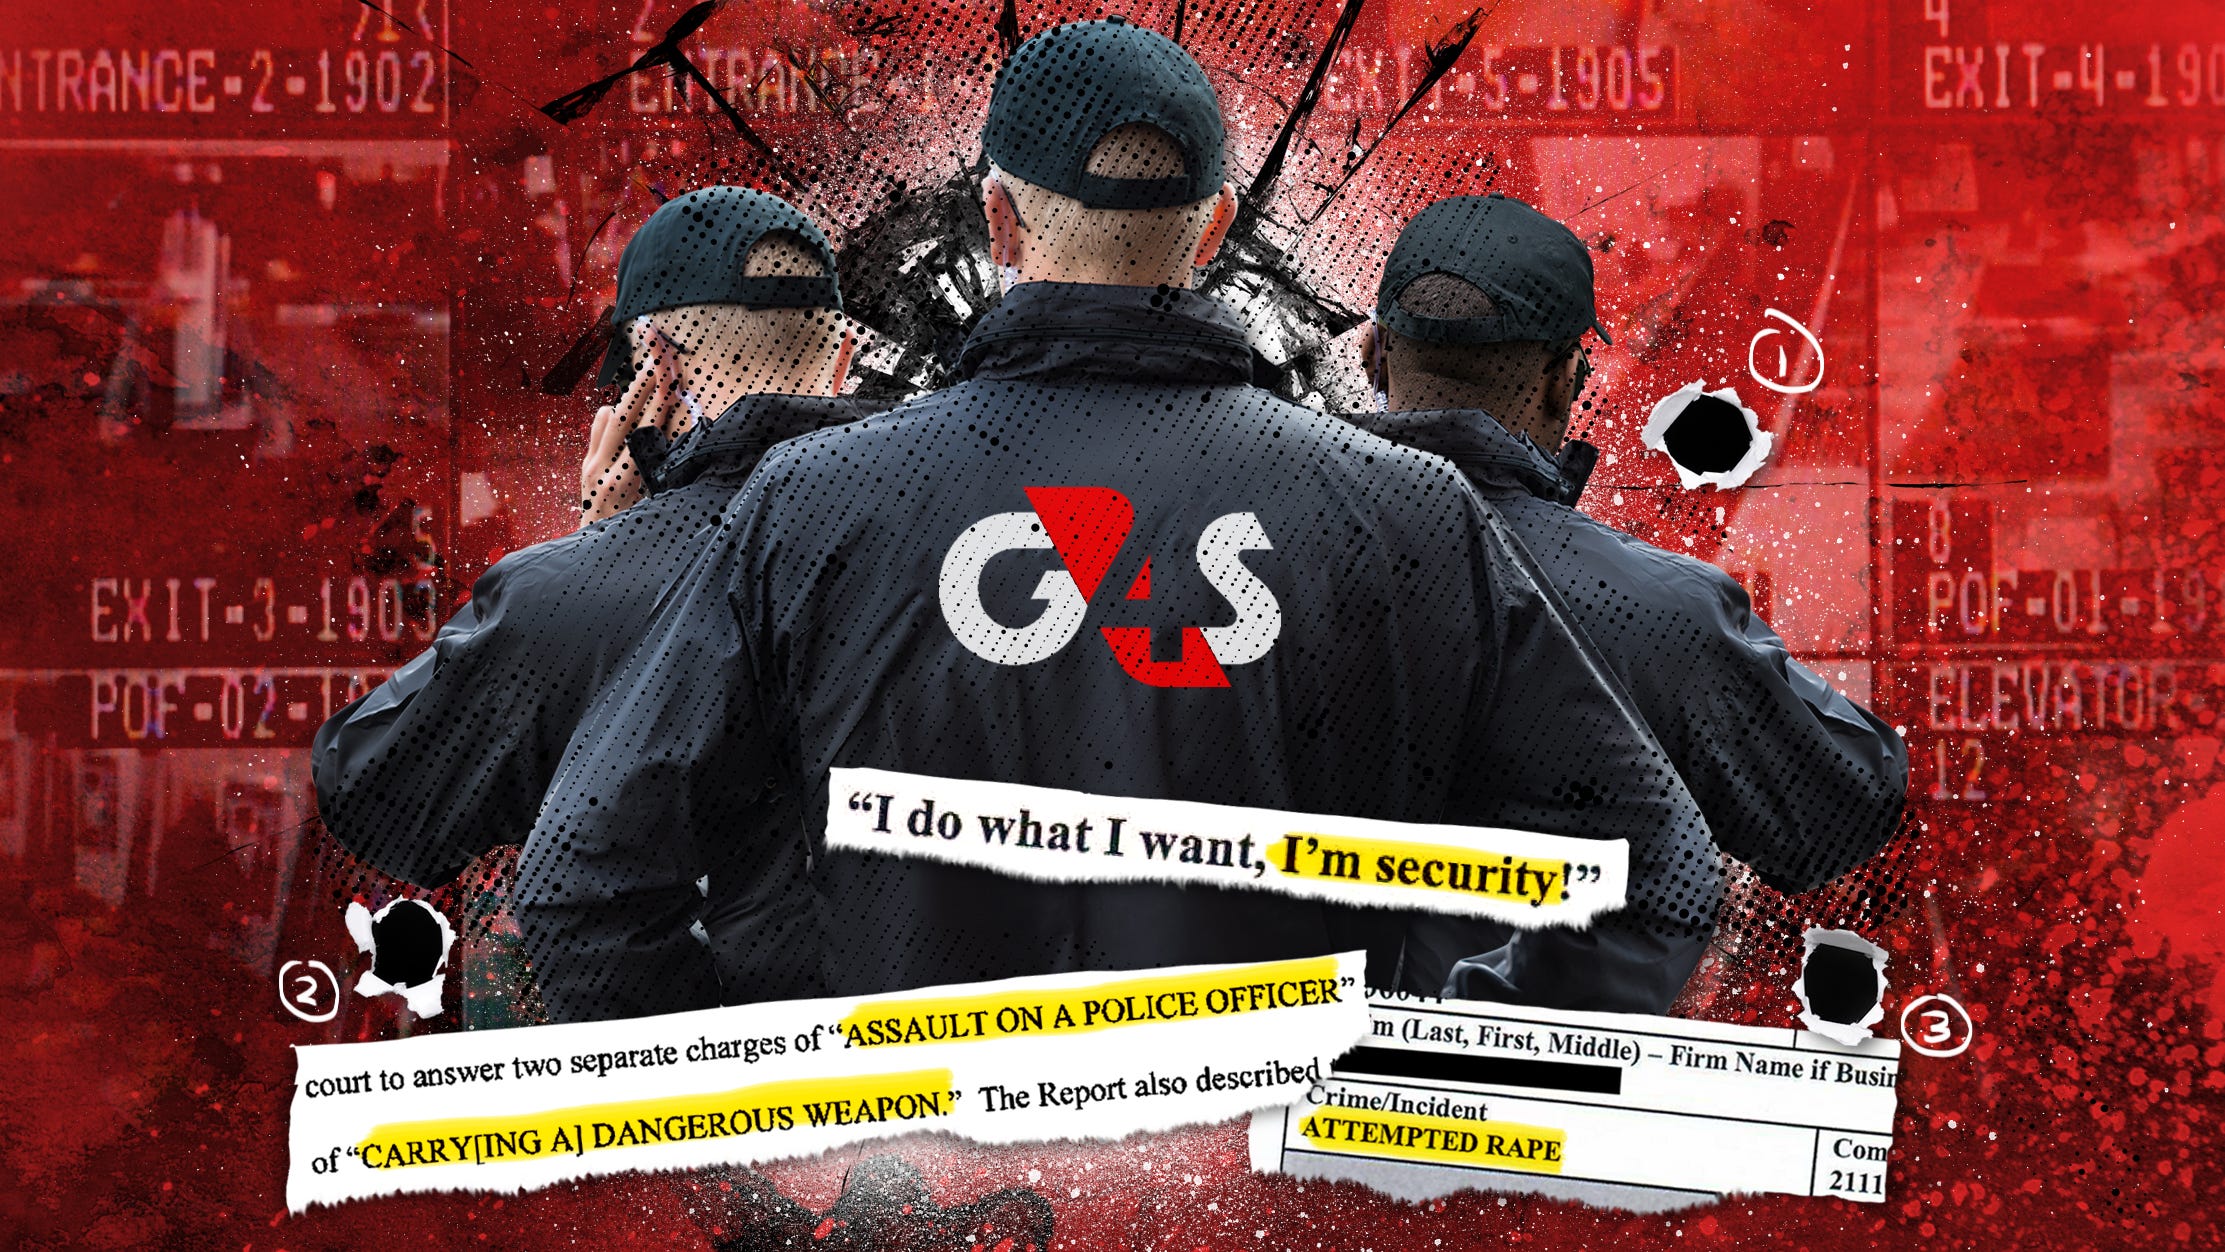 Stepbrother Rape Stepsister - G4S spread security guards and guns around world. Then came violence